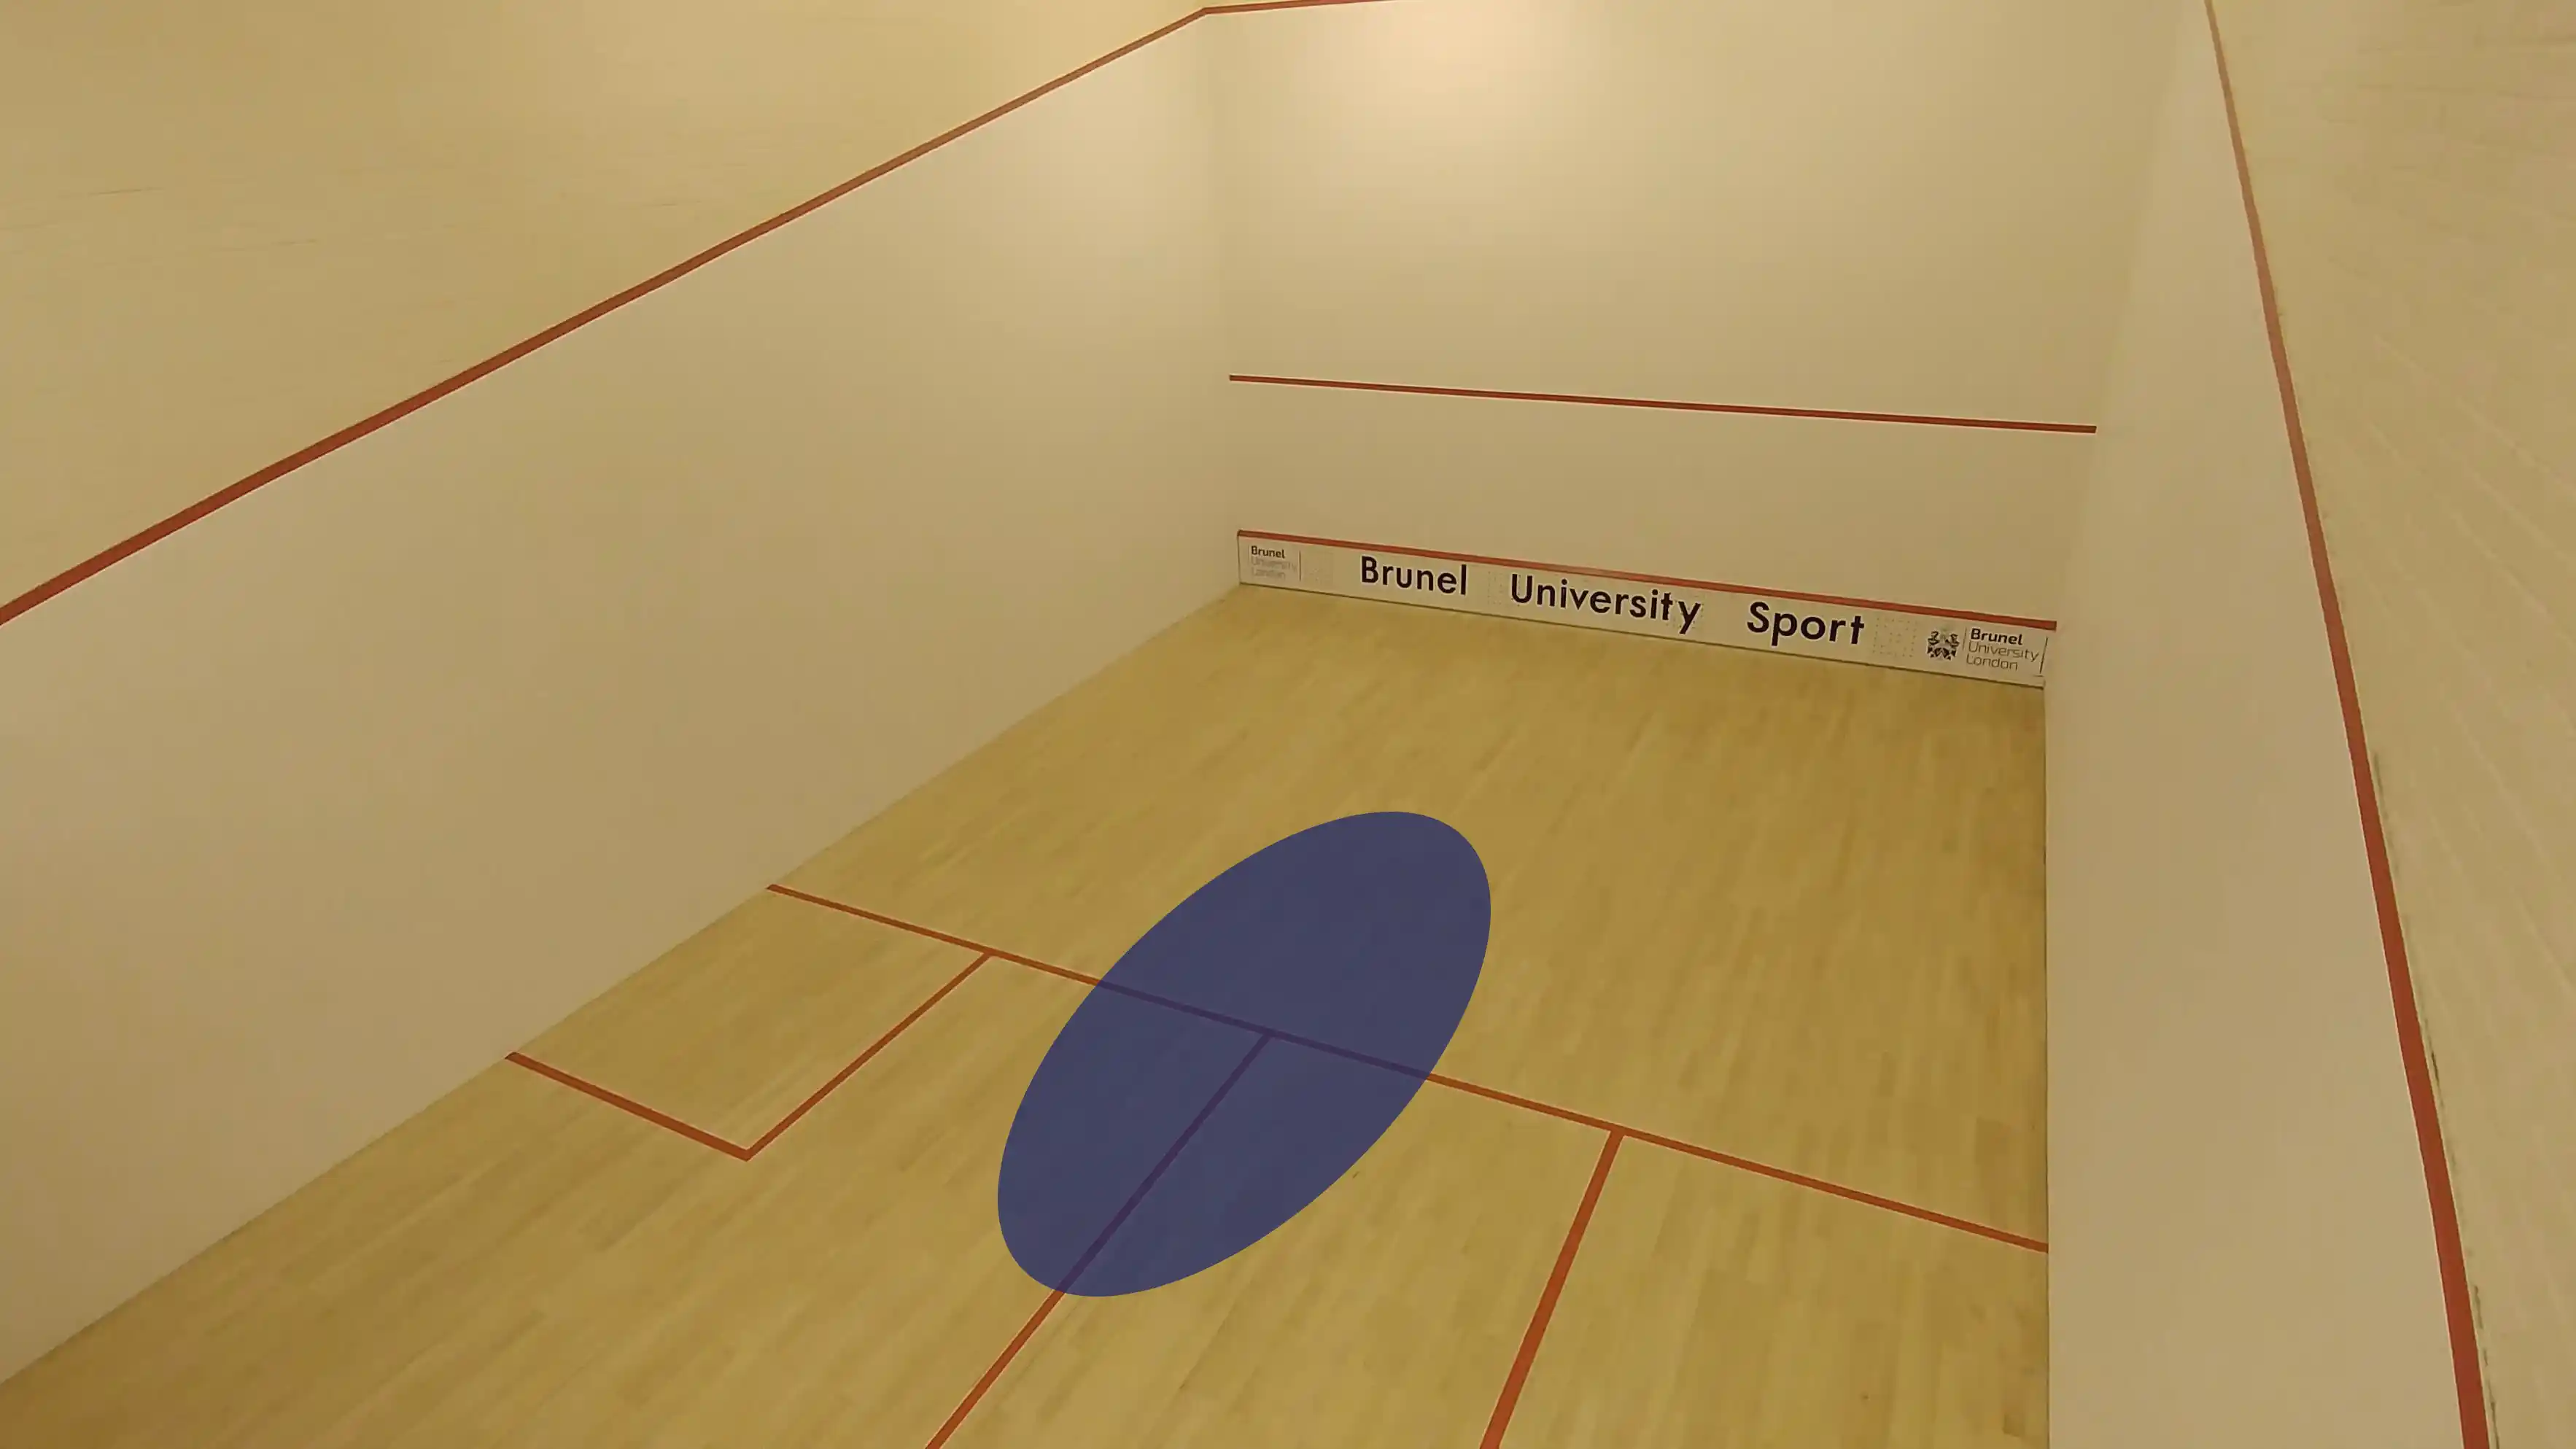 Where Exactly Is The T In Squash?